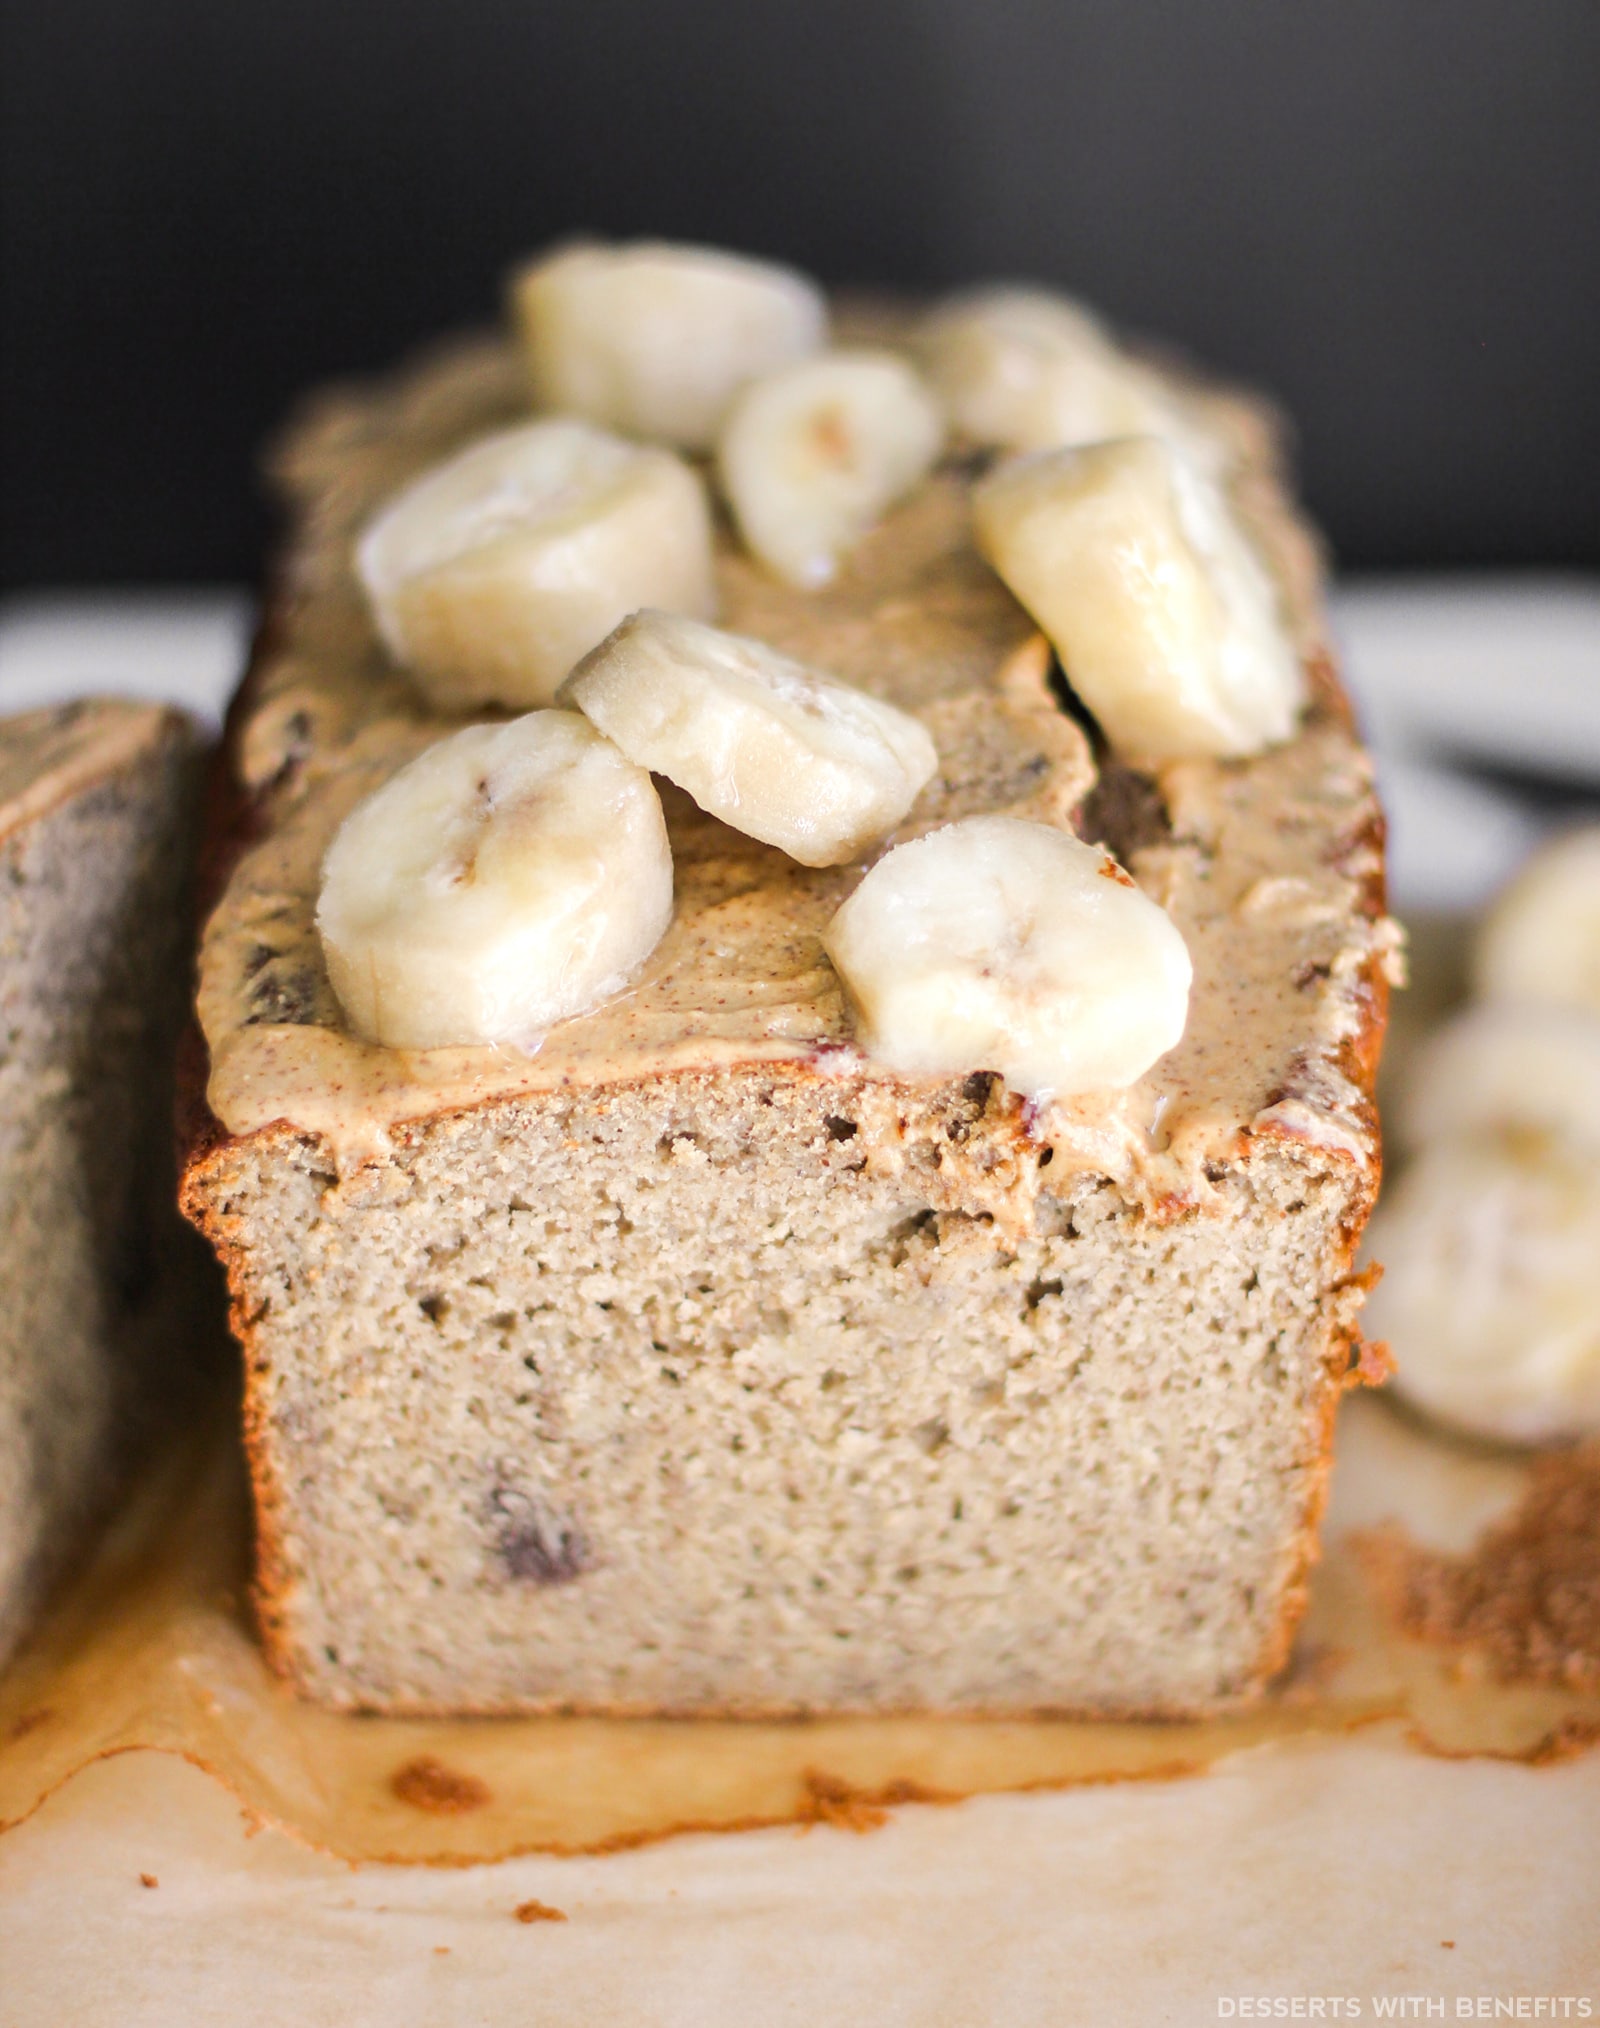 Desserts With Benefits Healthy Banana Bread (refined sugar free, high